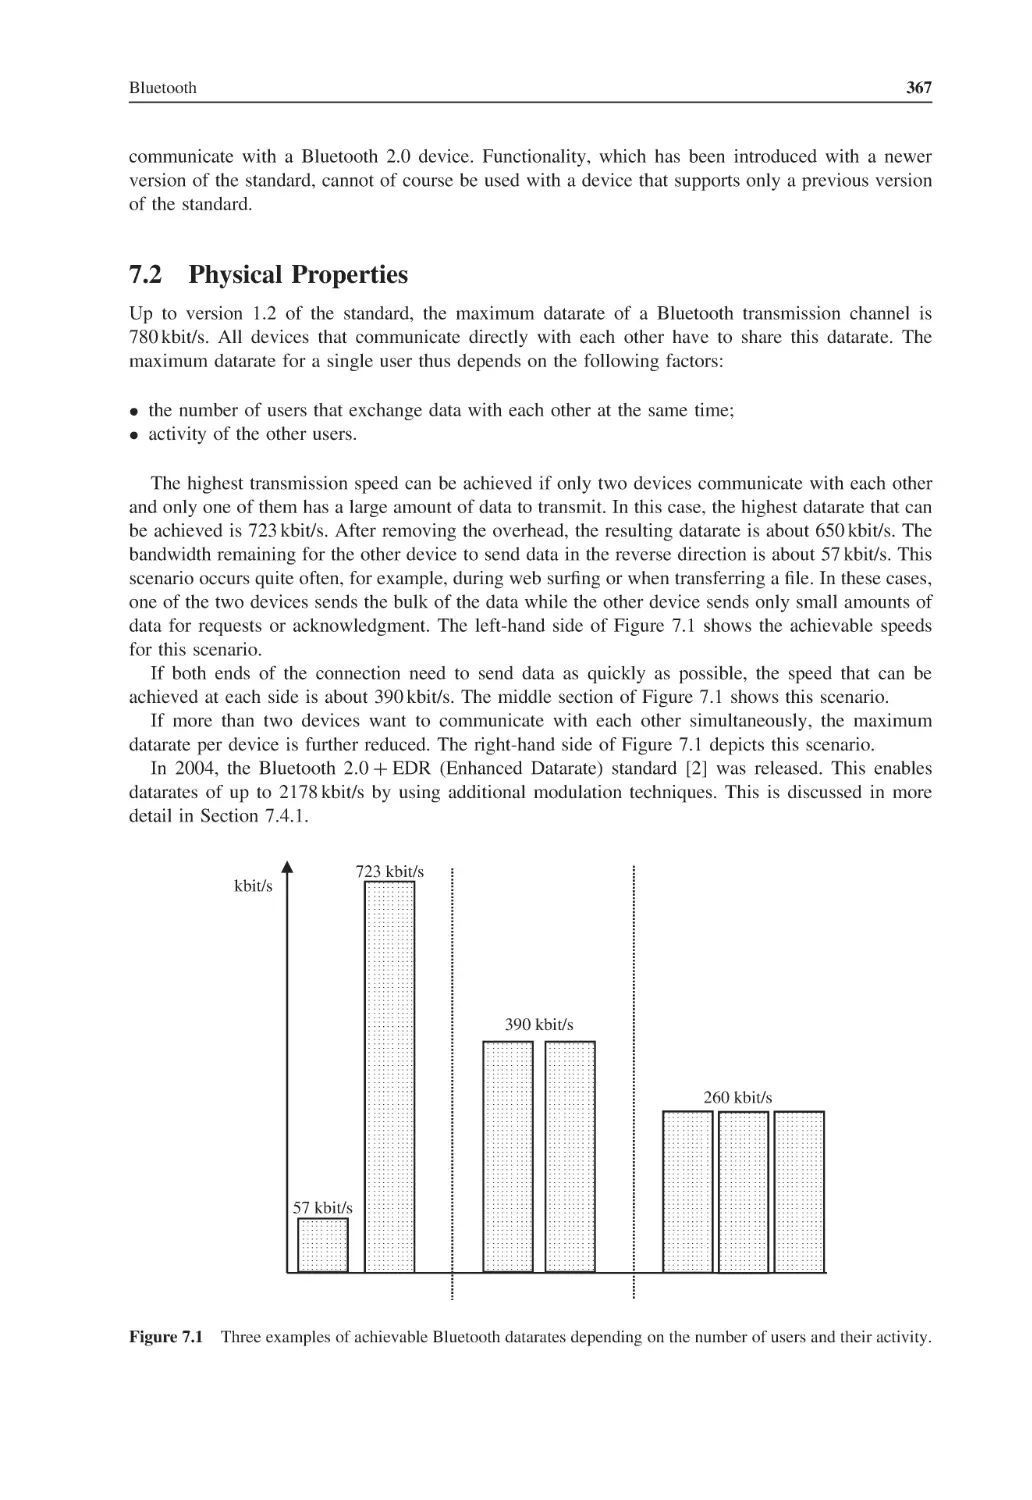 7.2 Physical Properties